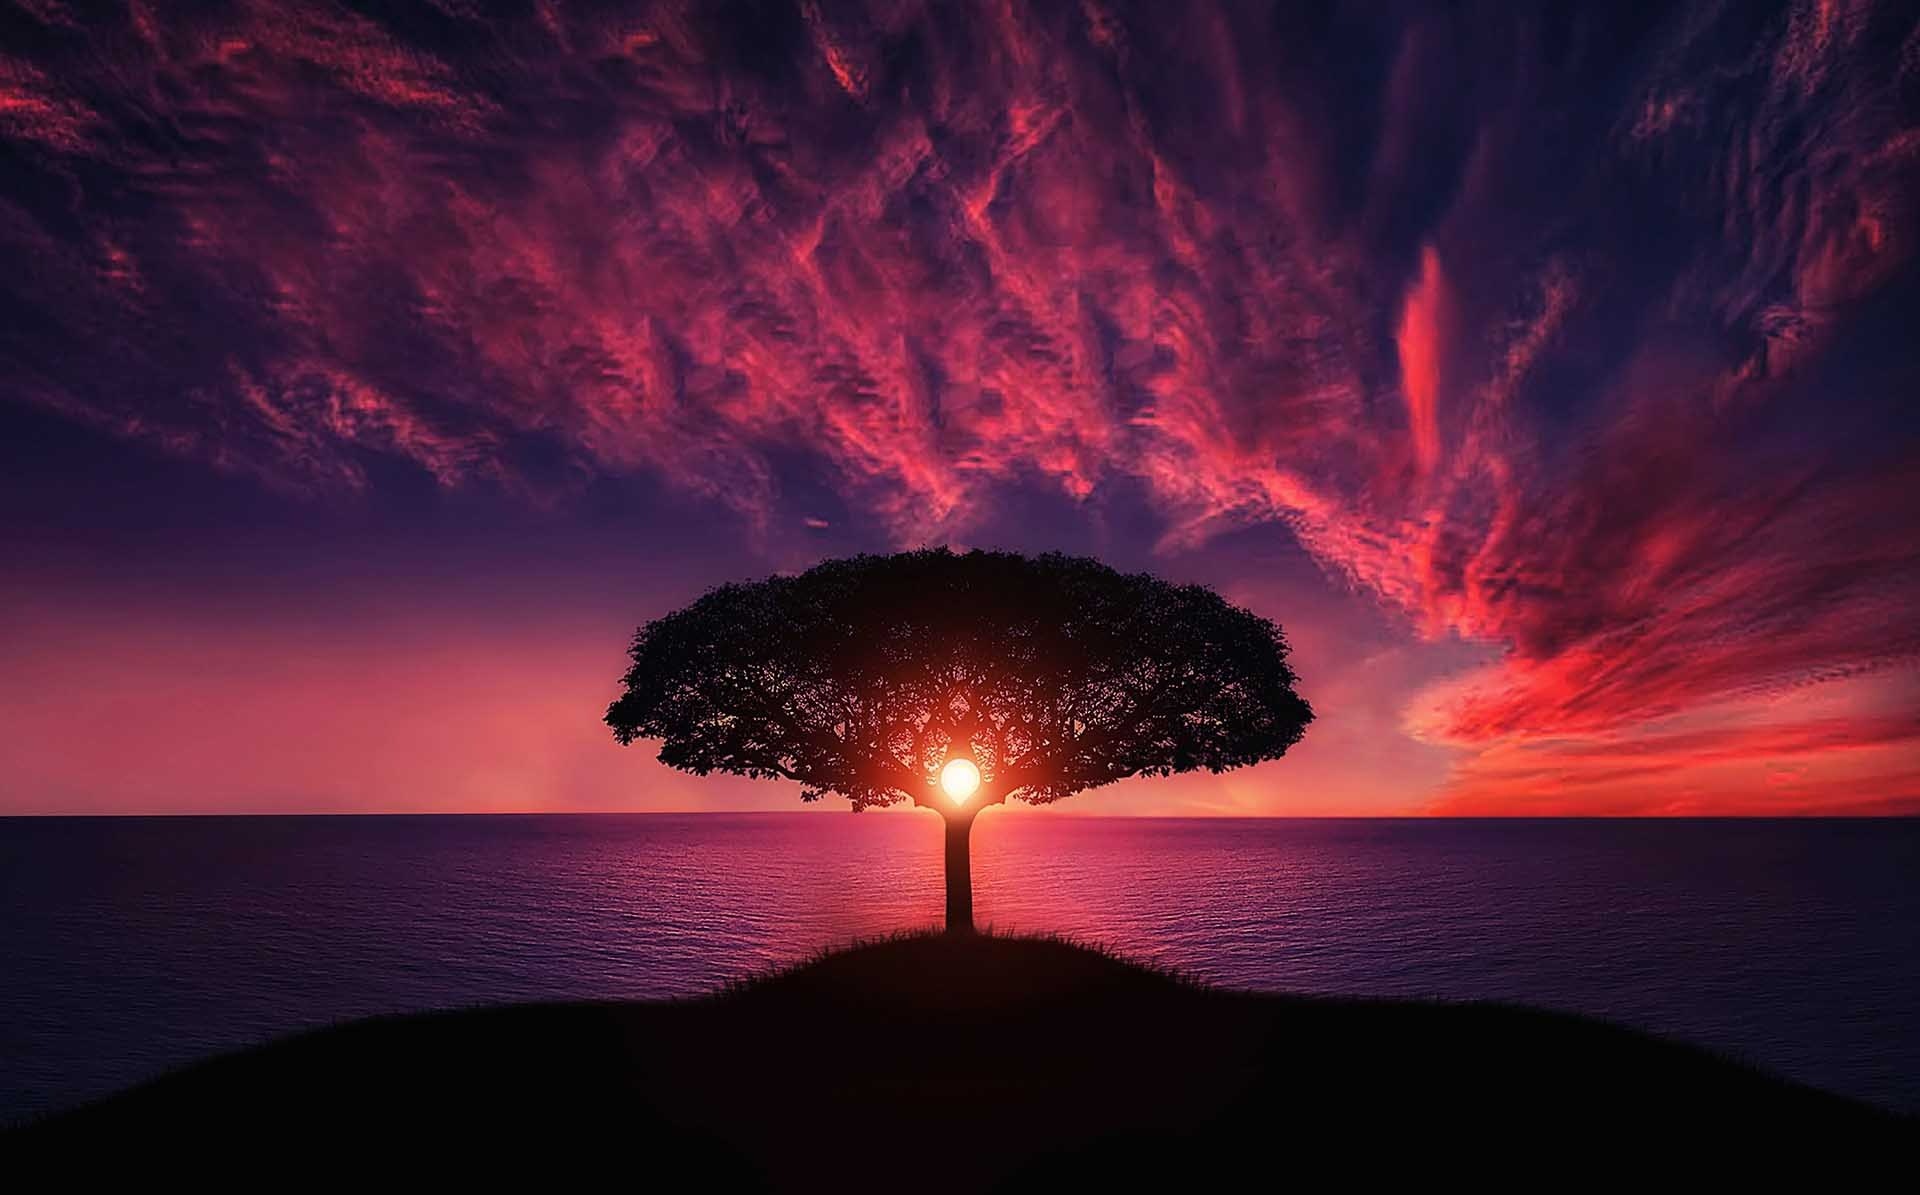 Beautiful Sky With A Tree Between The Landscape